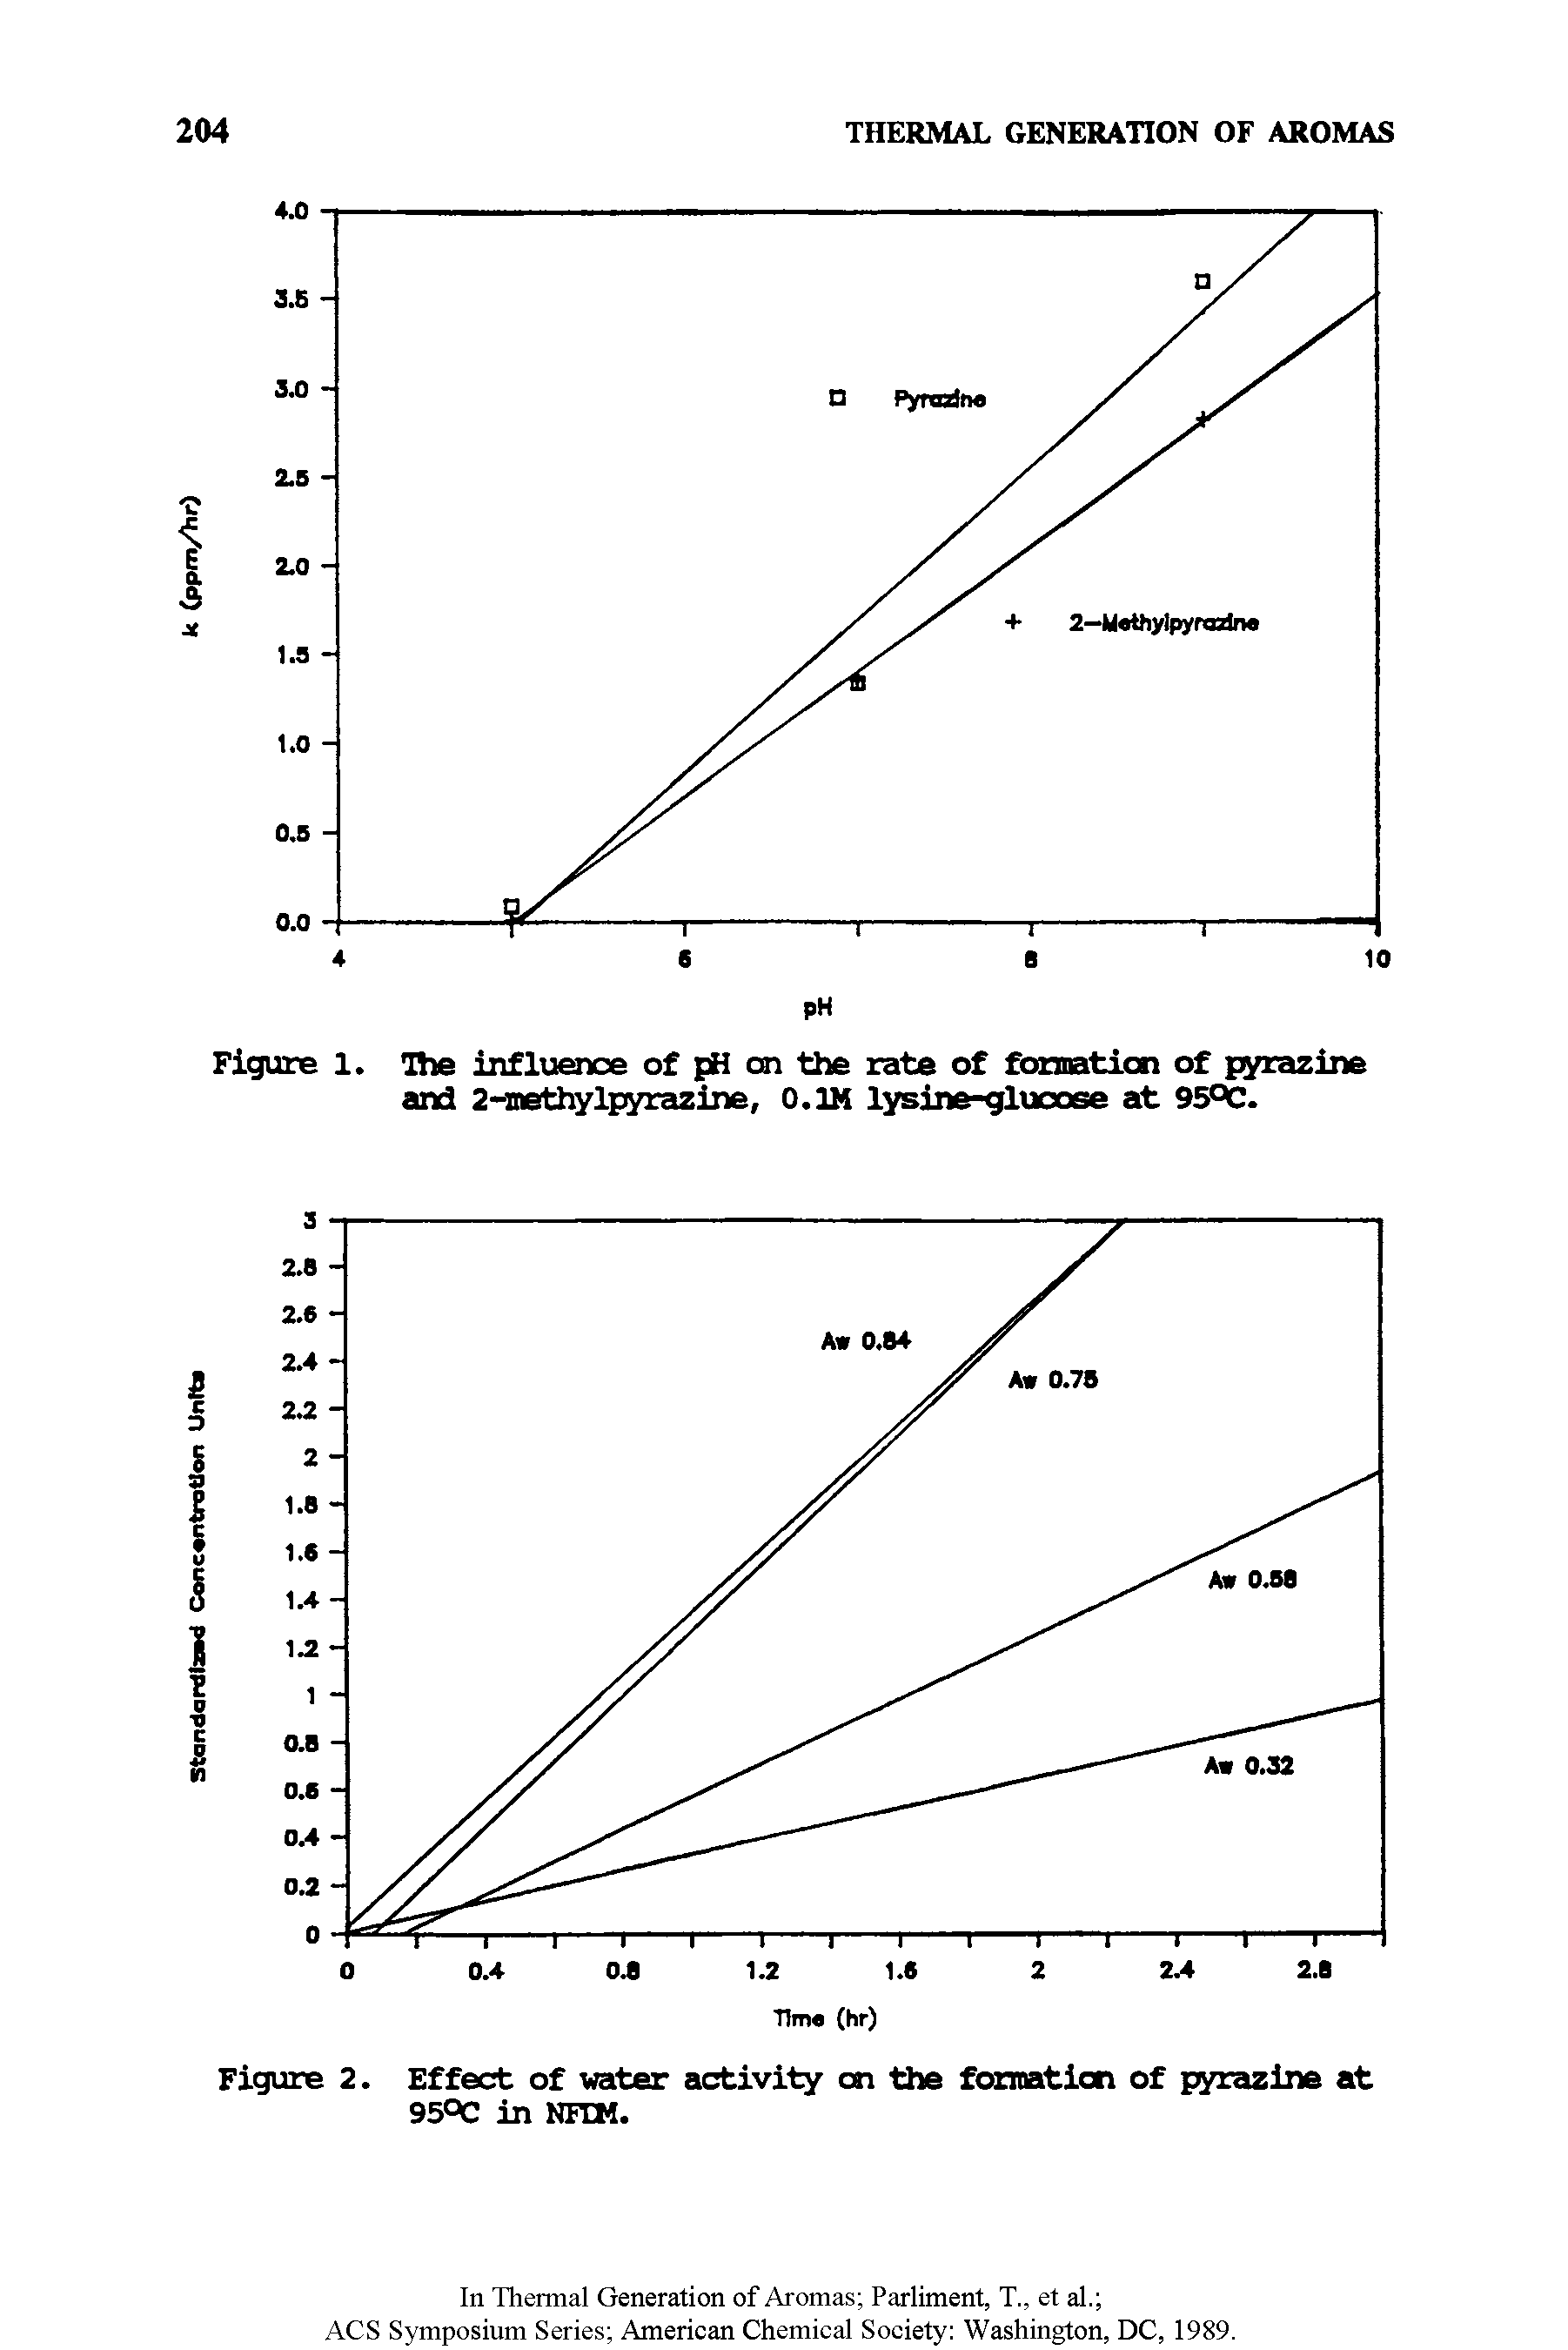 Figure 1. The influence of pH on the rate of formation of pyrazine and 2-methylpyrazine, 0.1M lysine-glucose at 95CC.